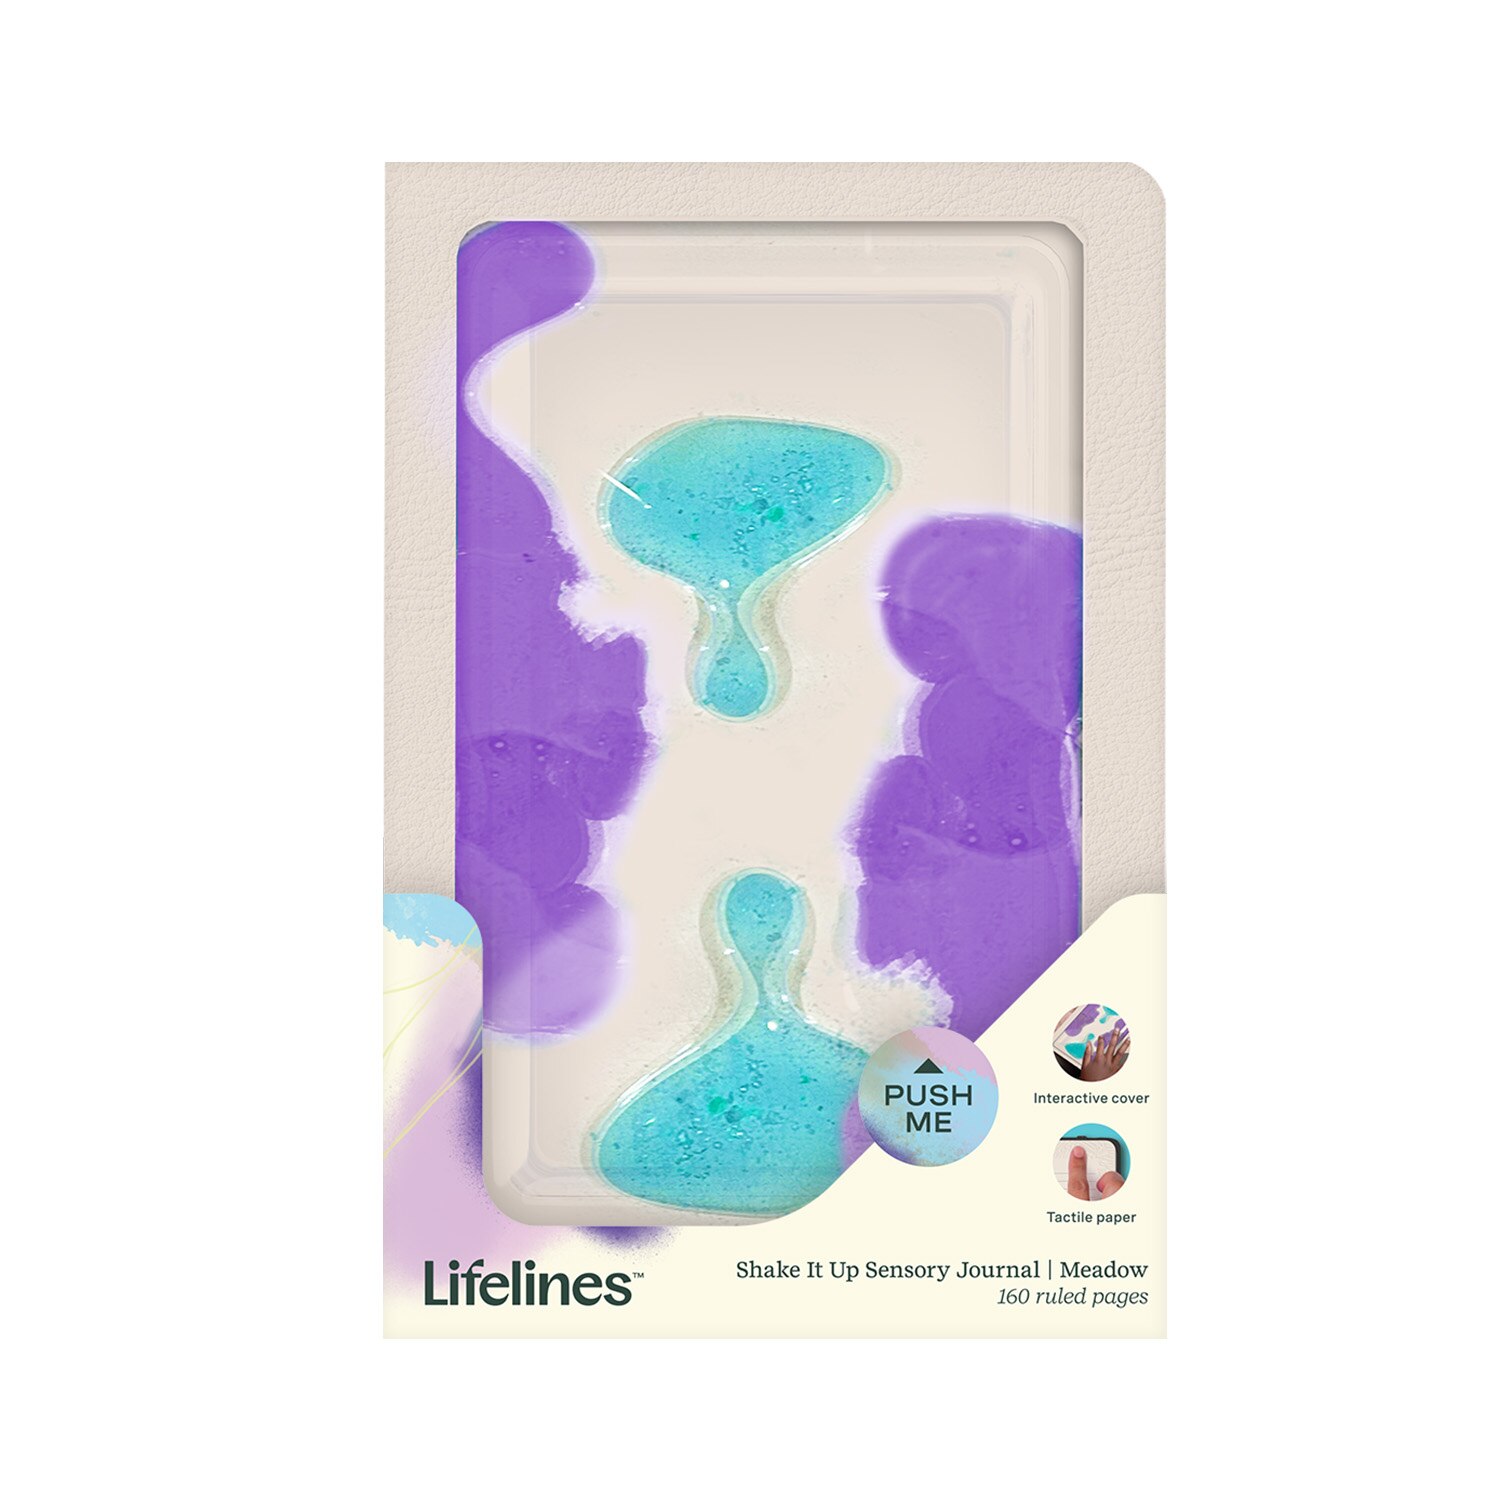 Lifelines "Shake It Up" Sensory Journal - with Tactile Cover & Embossed Paper - Purple Blue